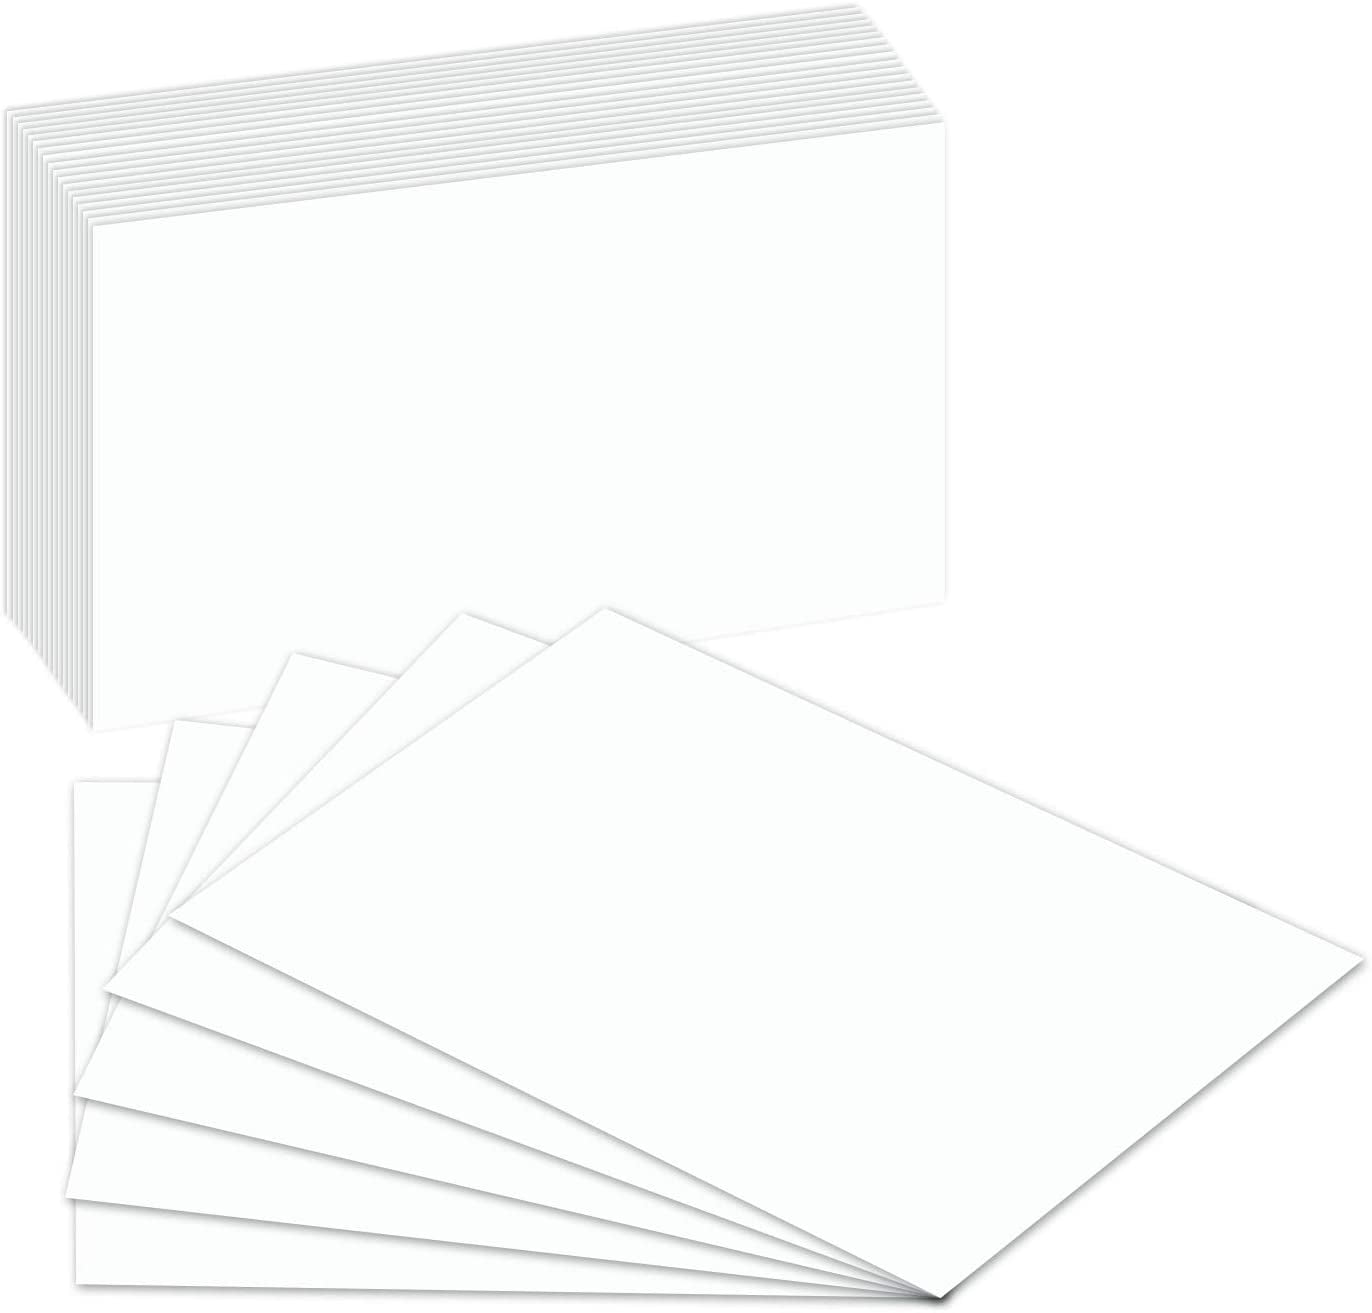 100 Extra Thick Index Cards, Blank Note Card, 14pt (0.014”) 100lb, Heavyweight Thick White Cover Stock, 100 Cards Per Pack